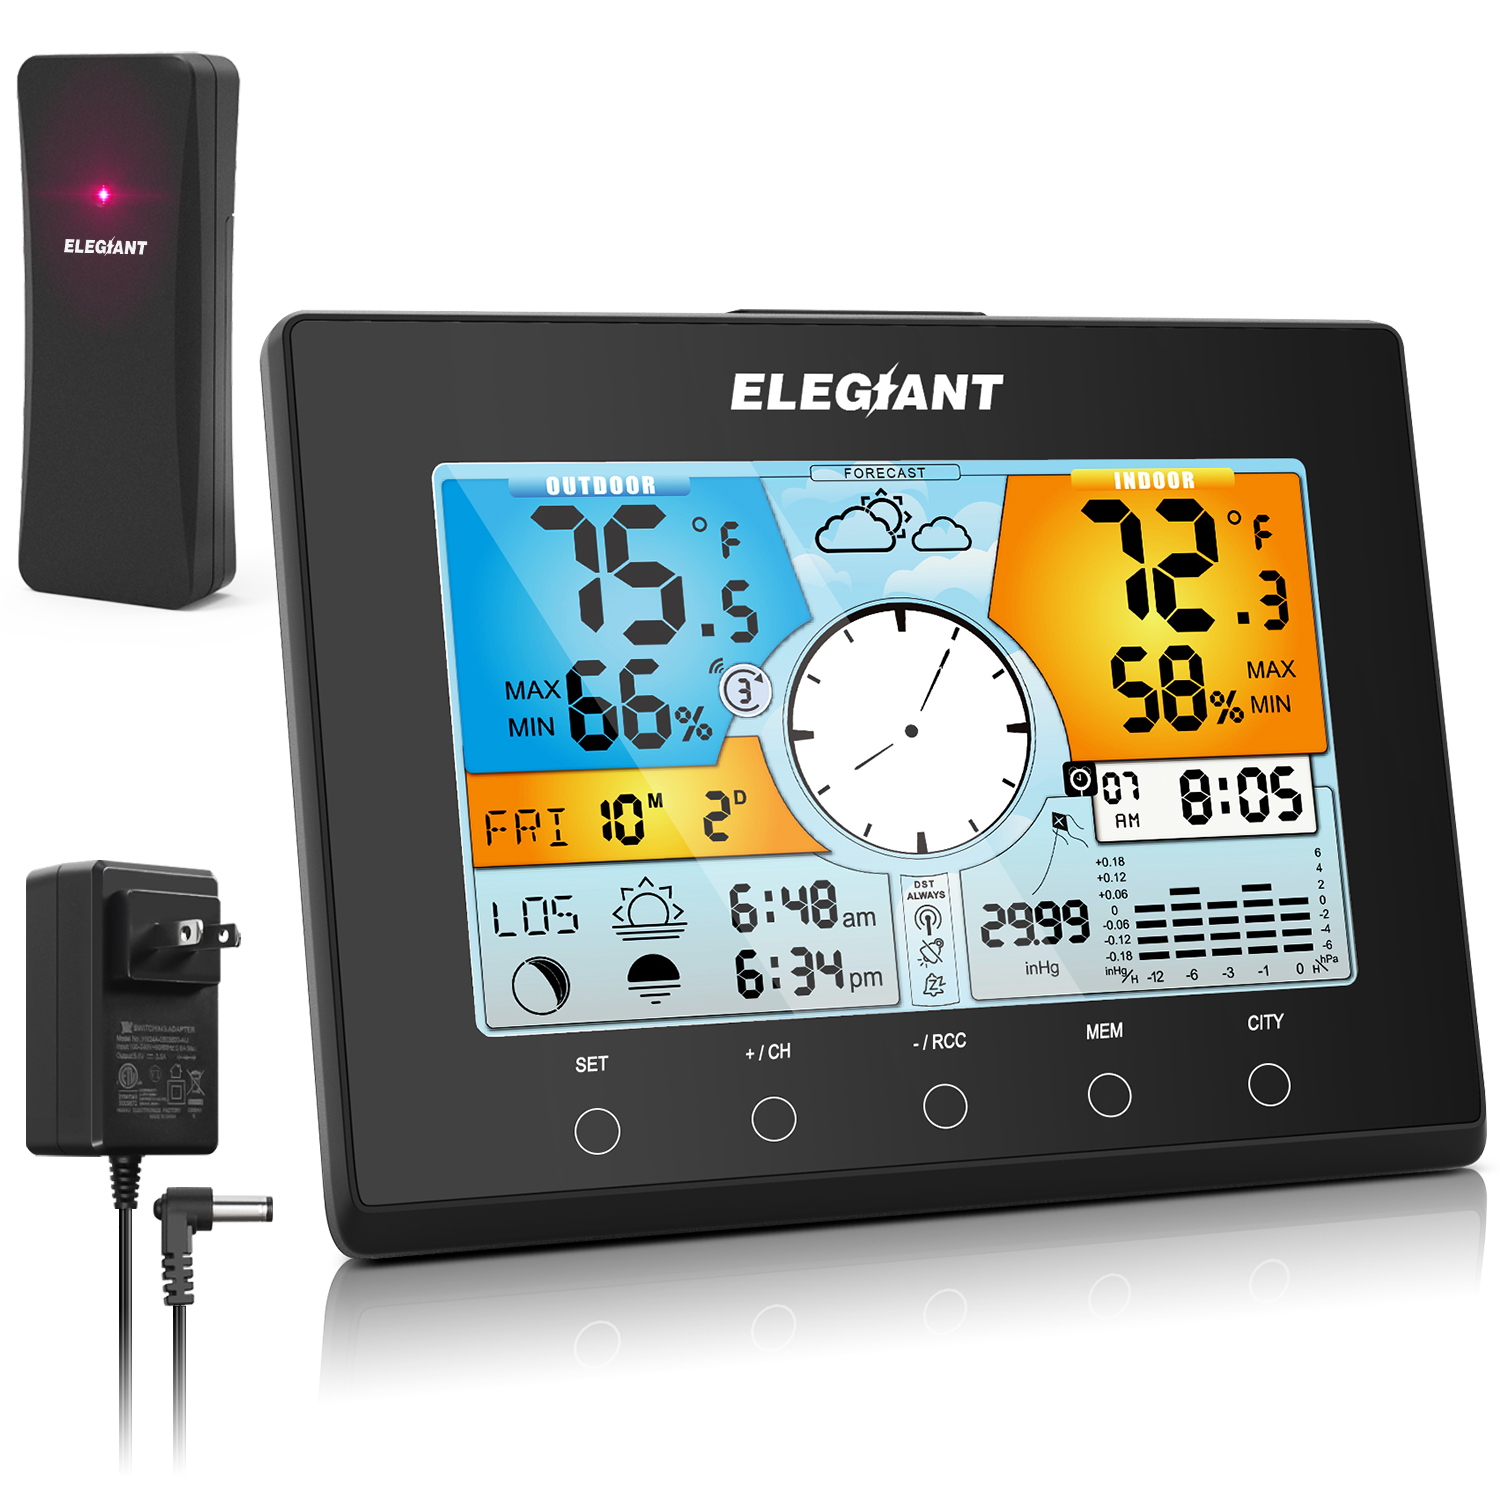 ELEGIANT Color Weather Station Auto Time Setting (WWVB) Indoor Outdoor  Thermometer Hygrometer Monitor Weather Forecast 4-Level Backlight |  EOX-9938 US